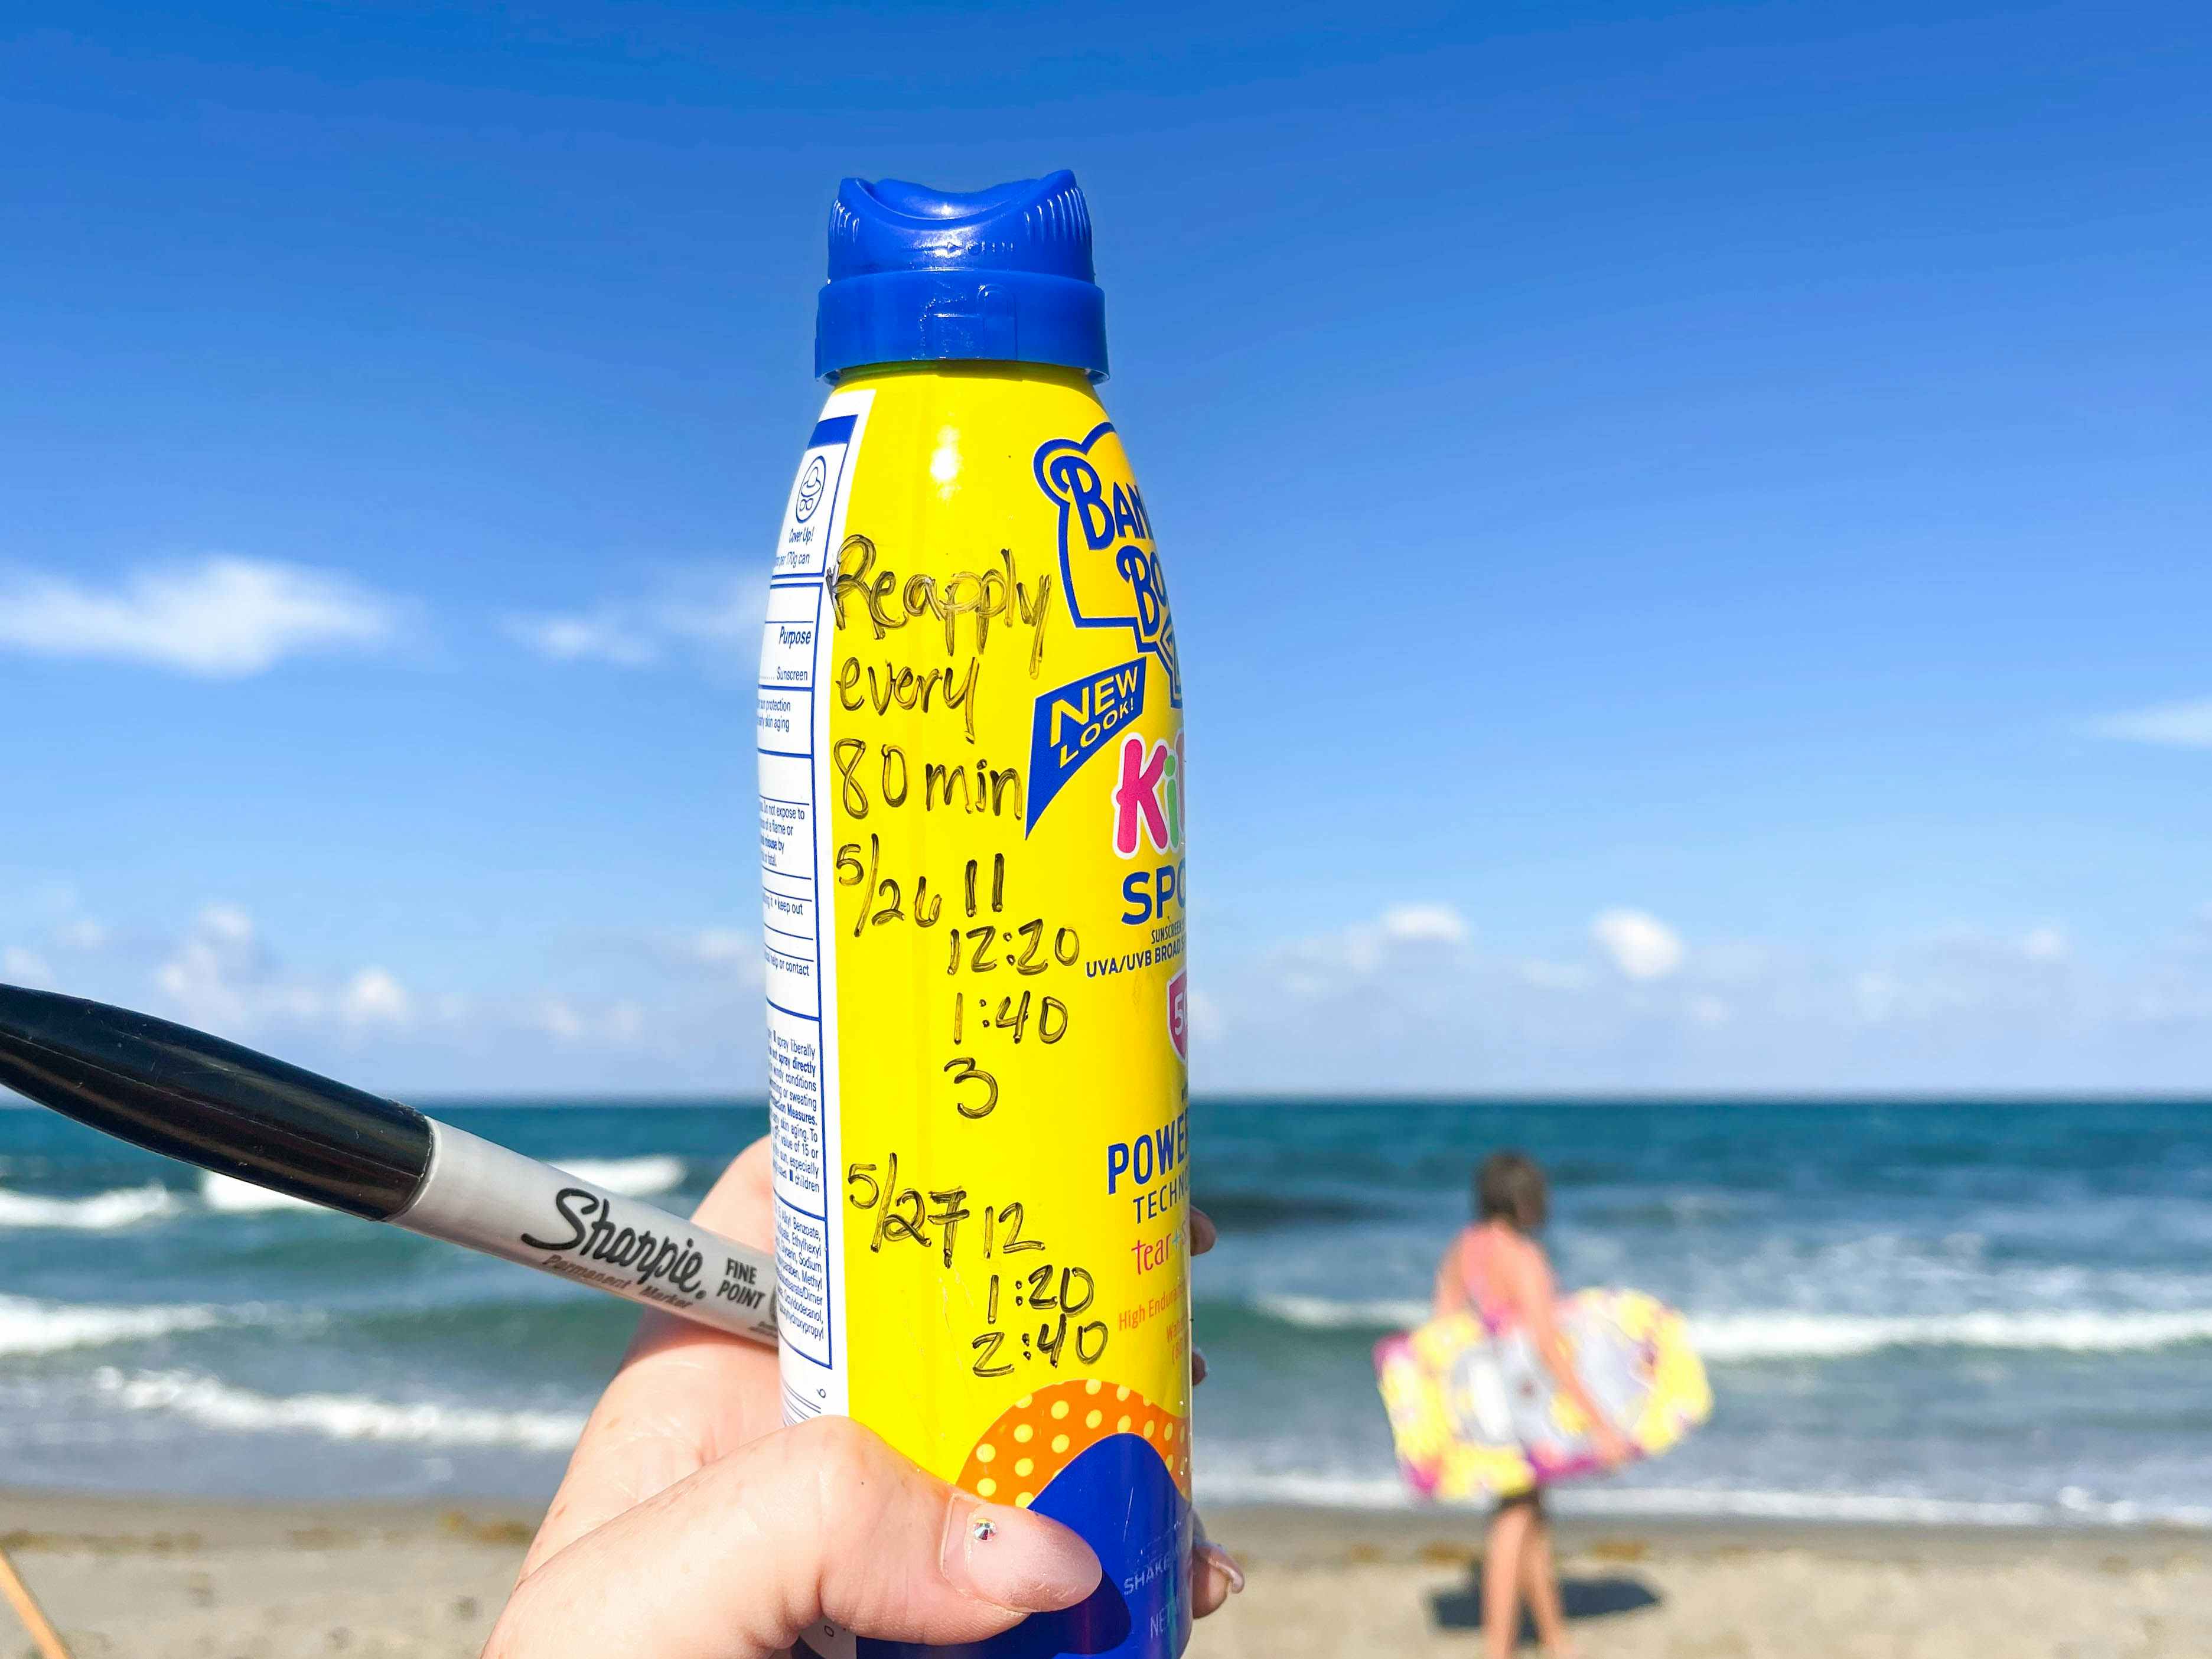 a spray bottle of sunscreen with times to reapply written in permanent marker at the beach